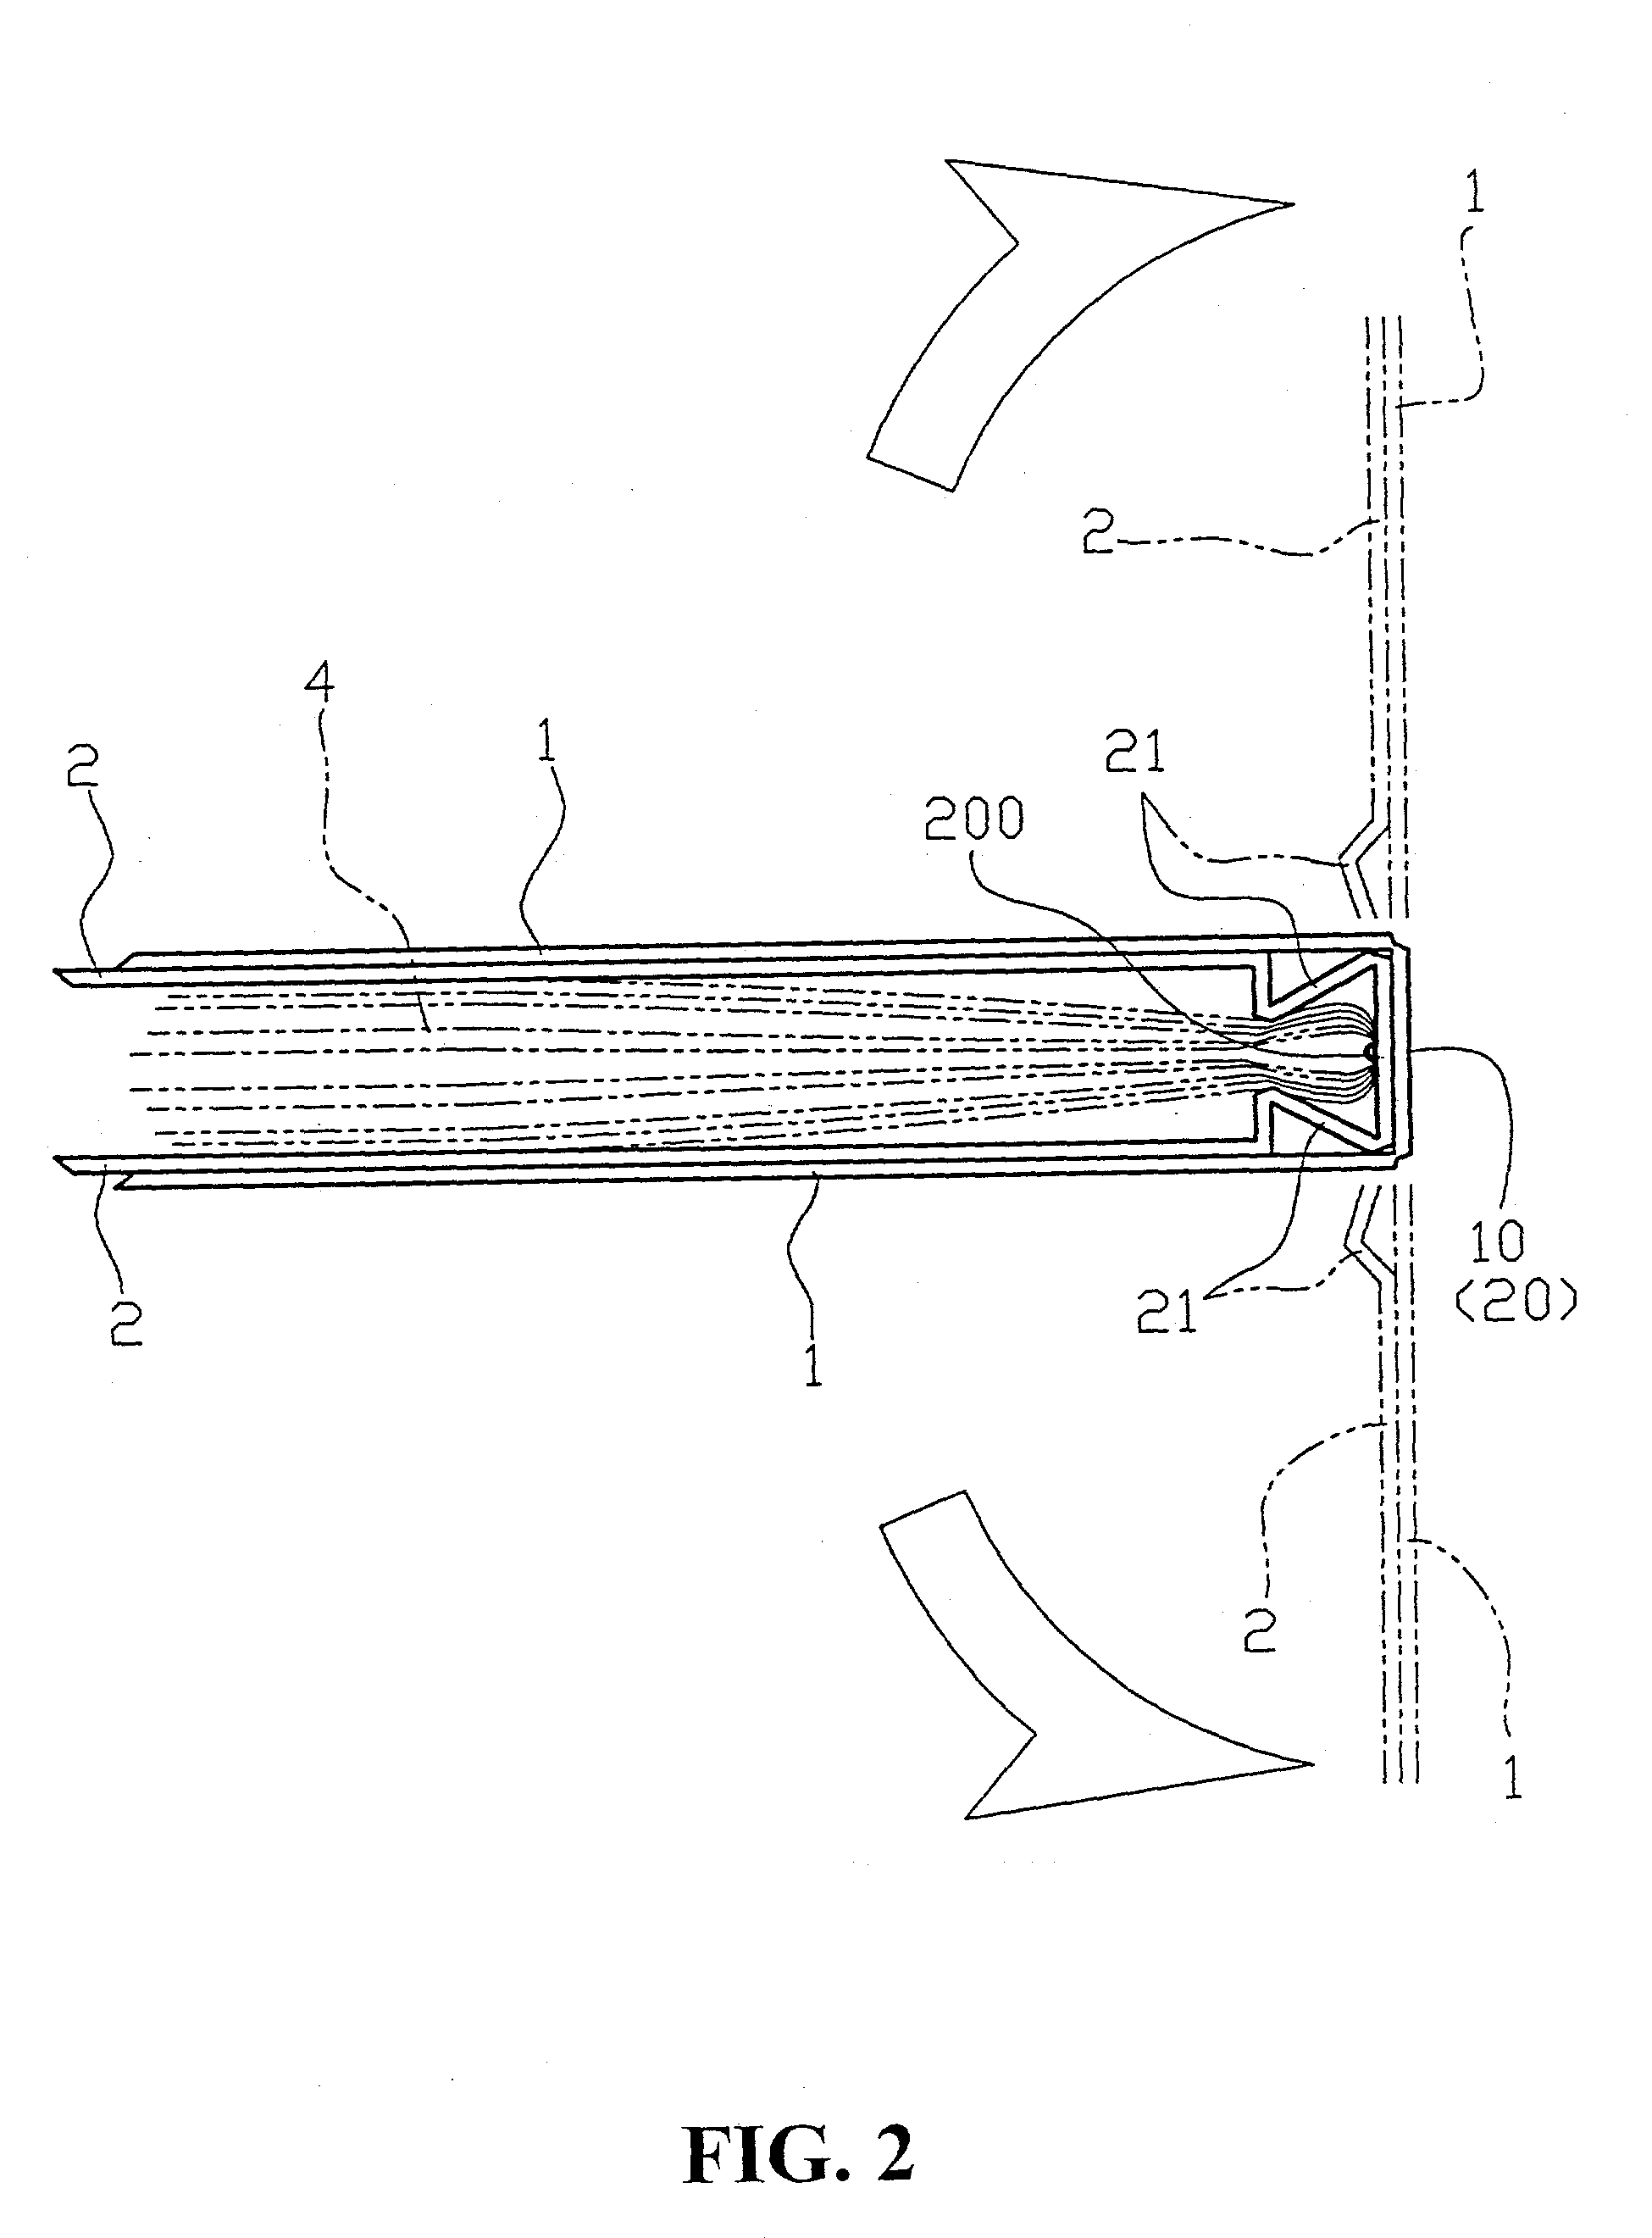 Structure of a file covering board or the like